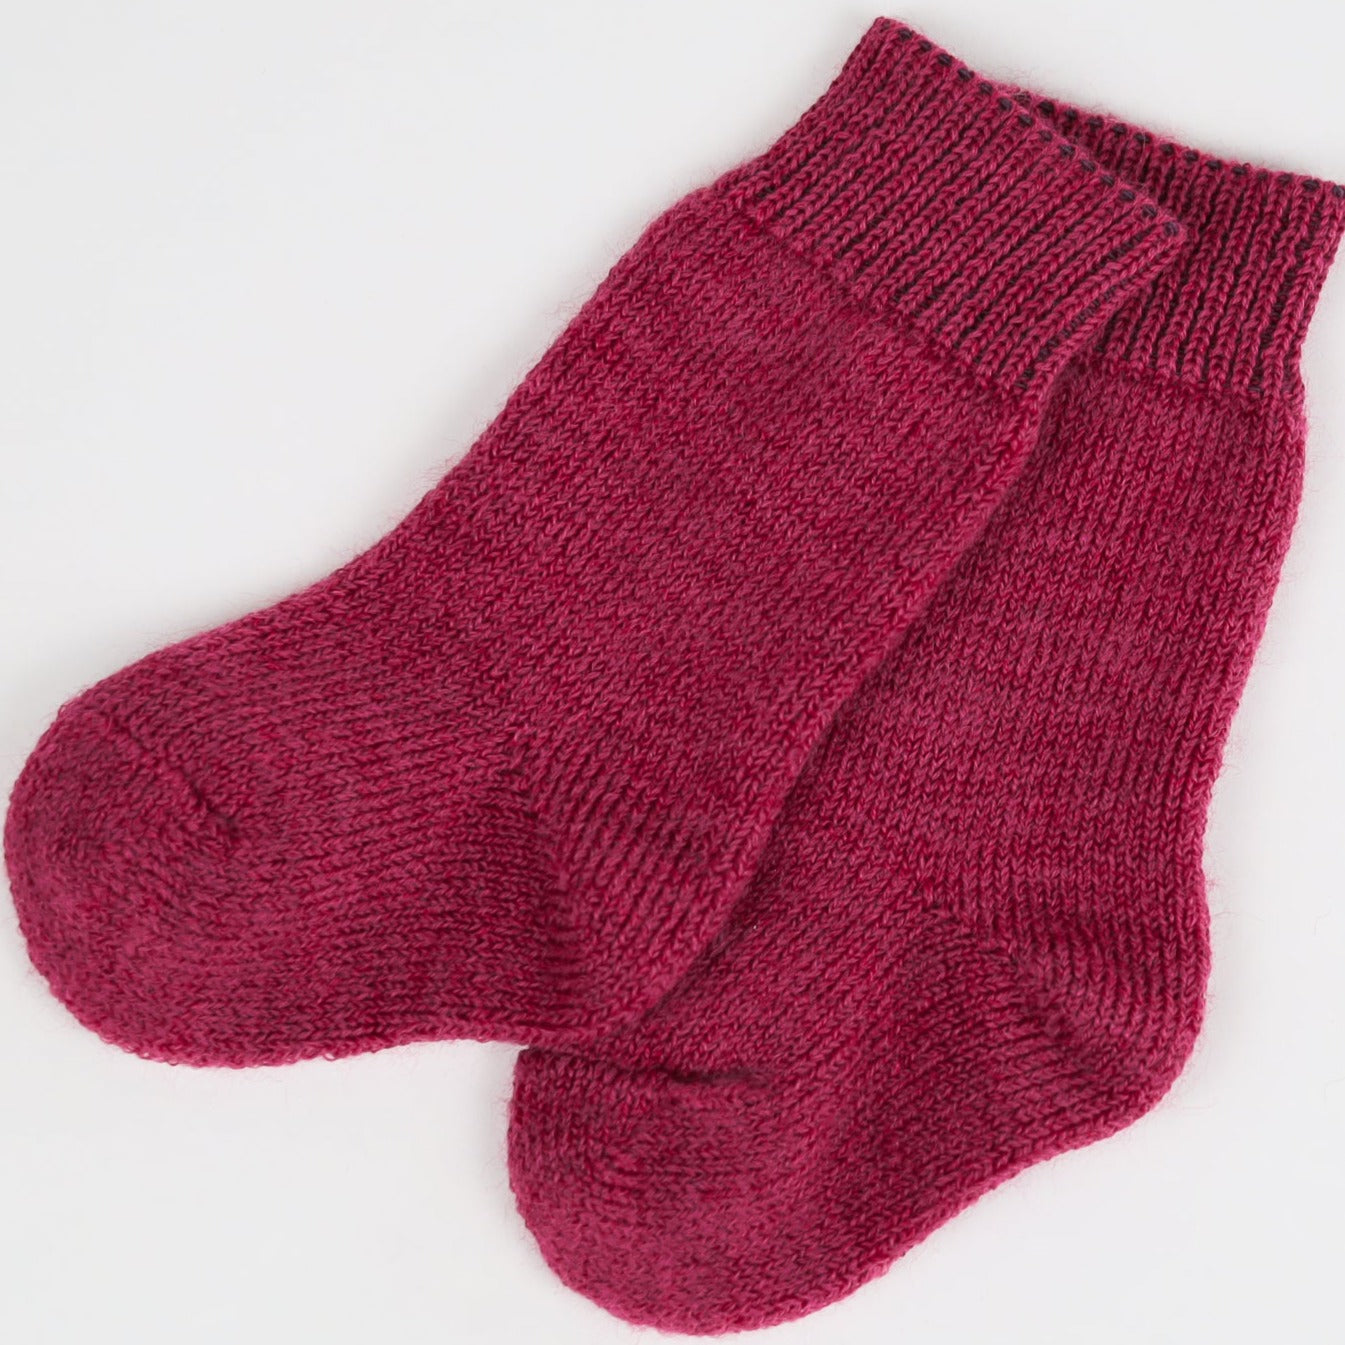 Hirsch Natur Organic Thick Knitted Wool Baby Leg Warmers